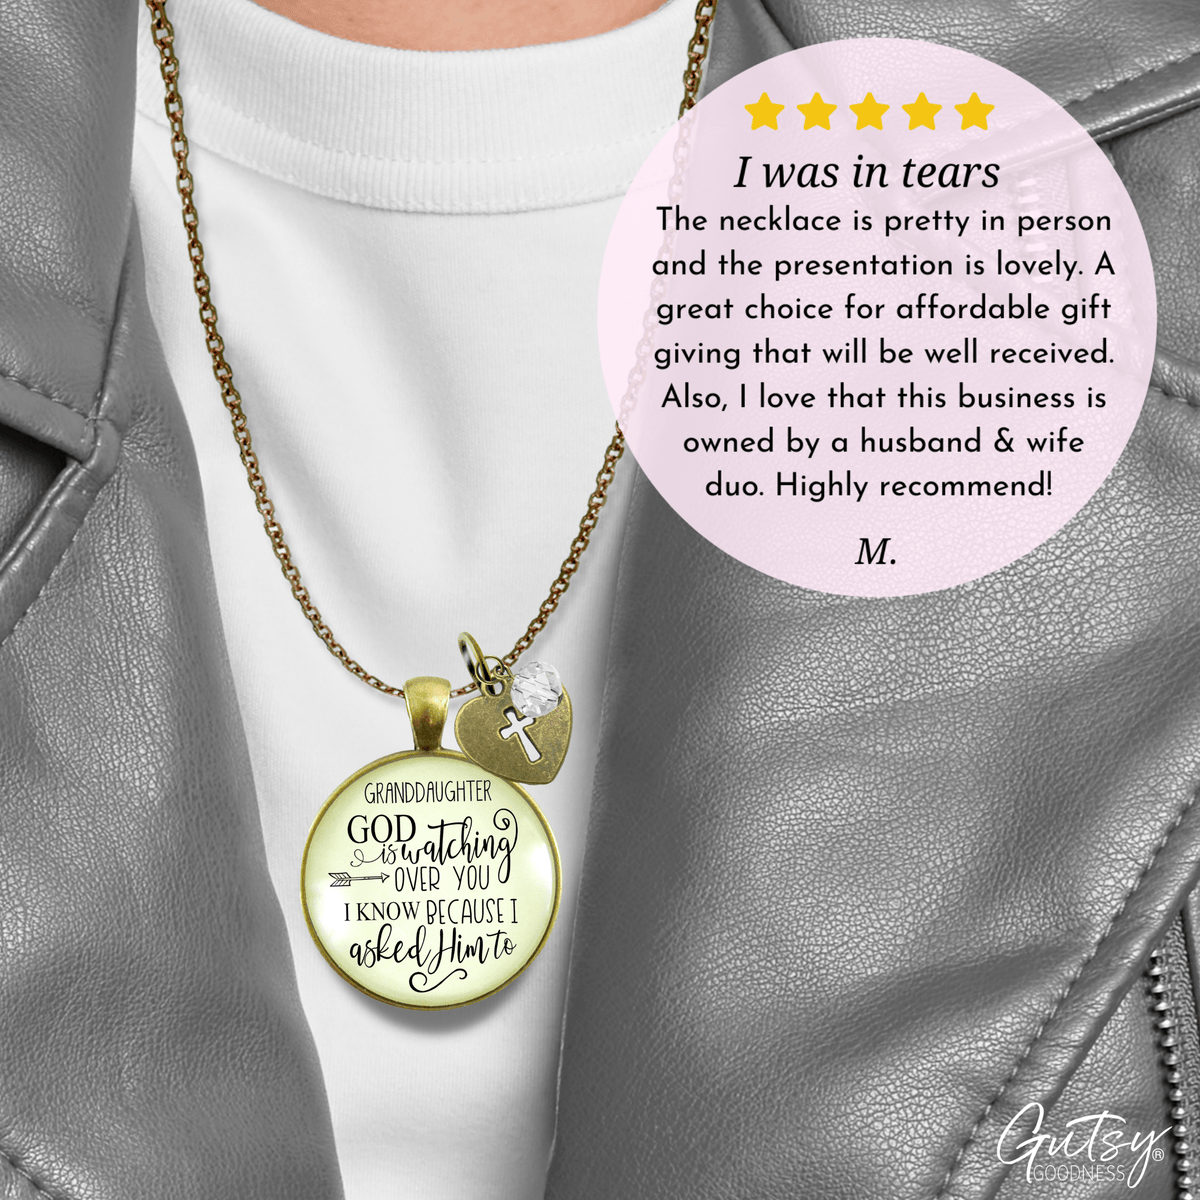 Gutsy Goodness Granddaughter Necklace He is Watching Over You Jewelry Gift from Grandma Grandpa - Gutsy Goodness;Granddaughter Necklace He Is Watching Over You Jewelry Gift From Grandma Grandpa - Gutsy Goodness Handmade Jewelry Gifts